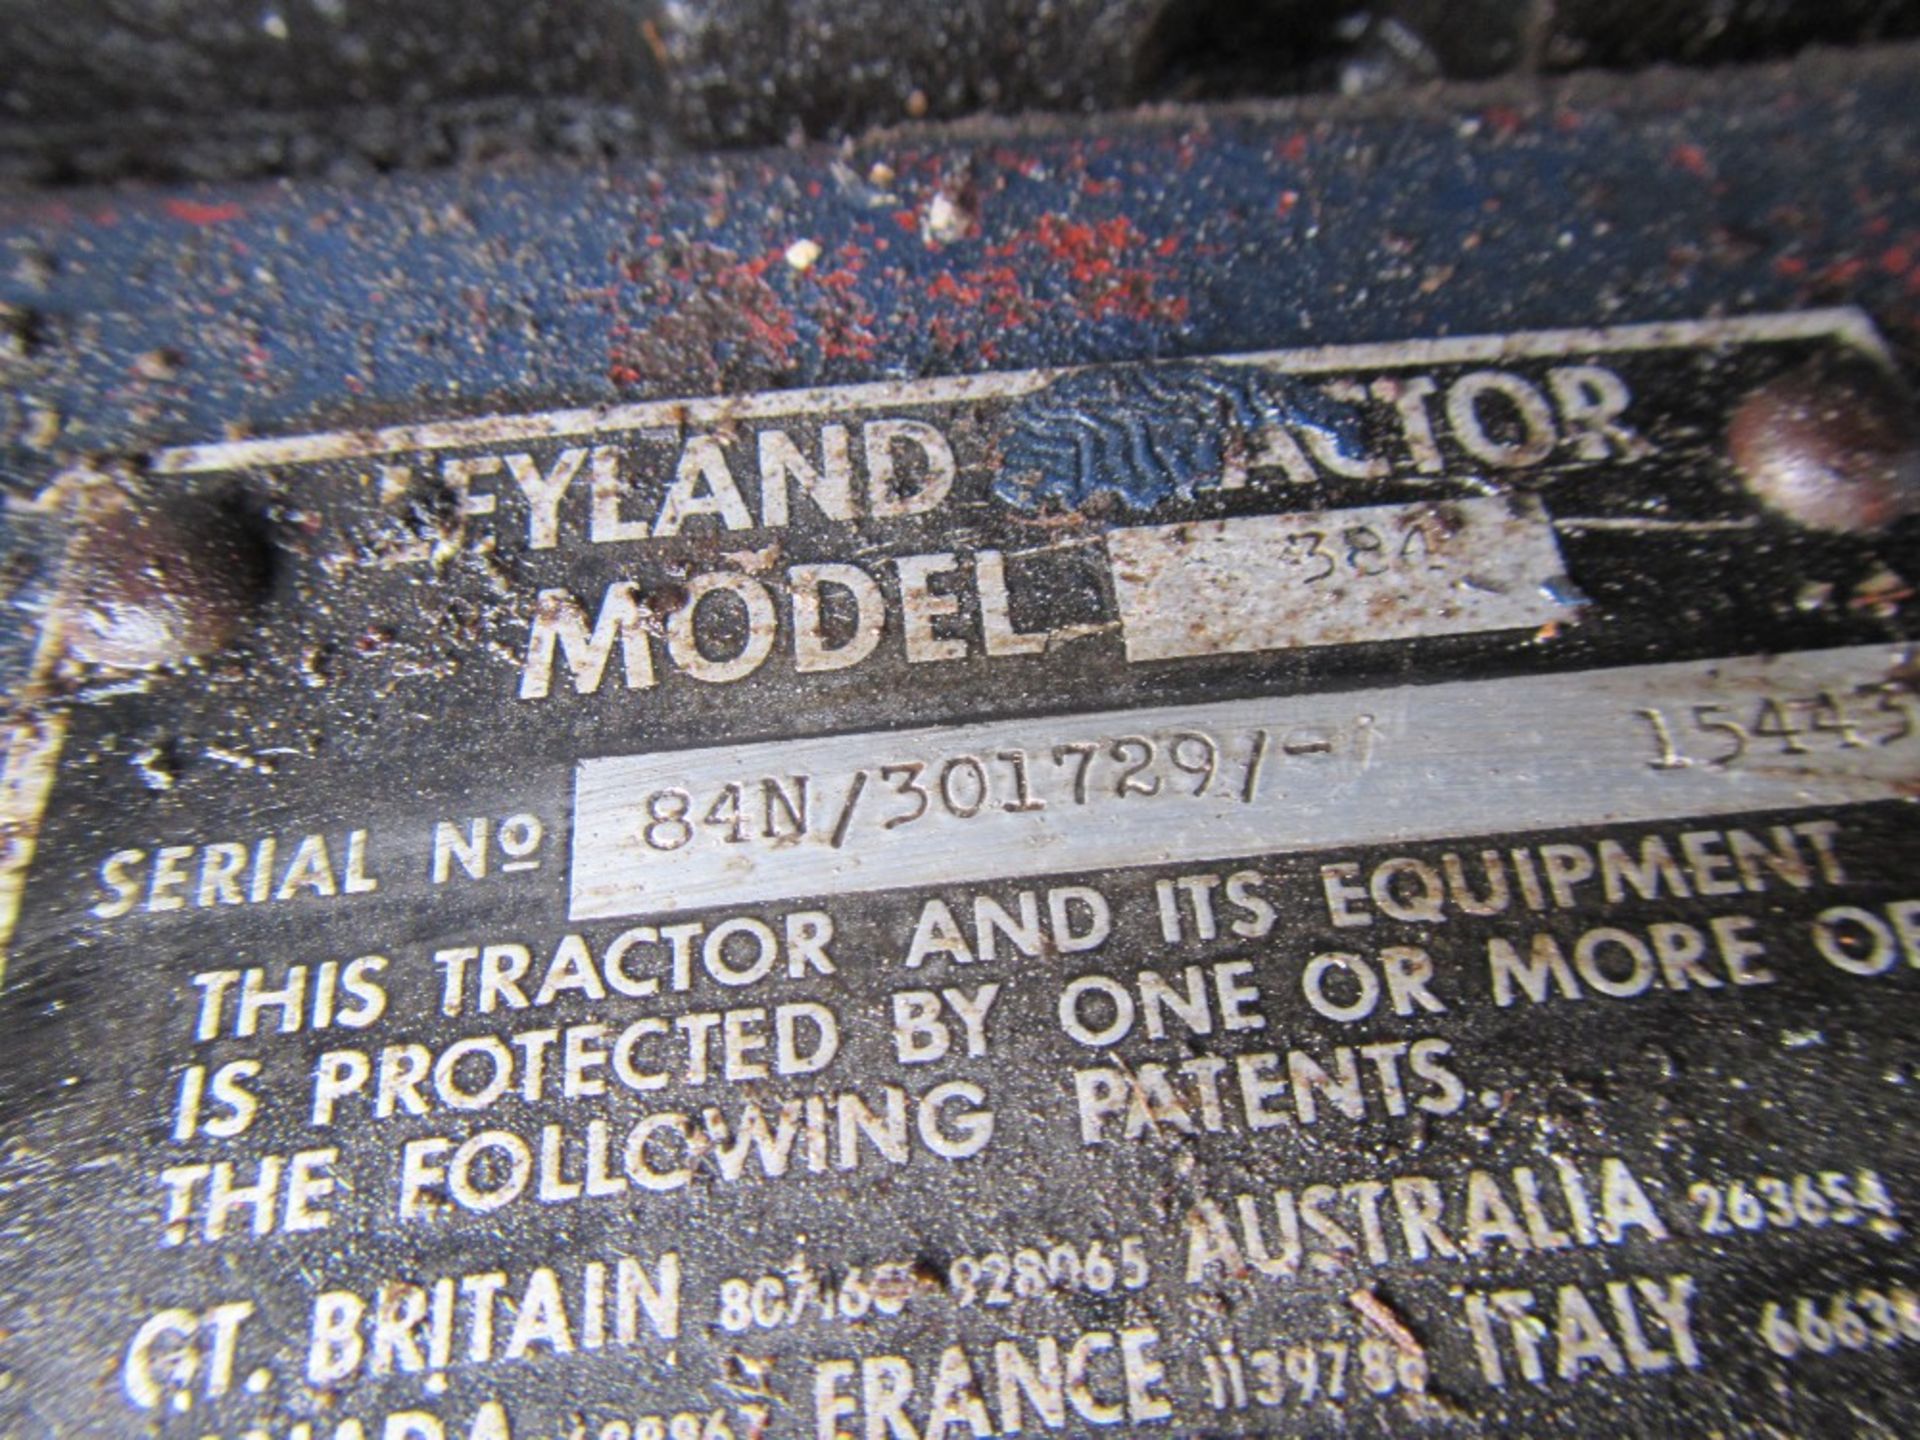 Leyland 384 2wd Tractor with Weights Reg No TJL 962K Ser No 301729 UNRESERVED LOT - Image 16 of 16